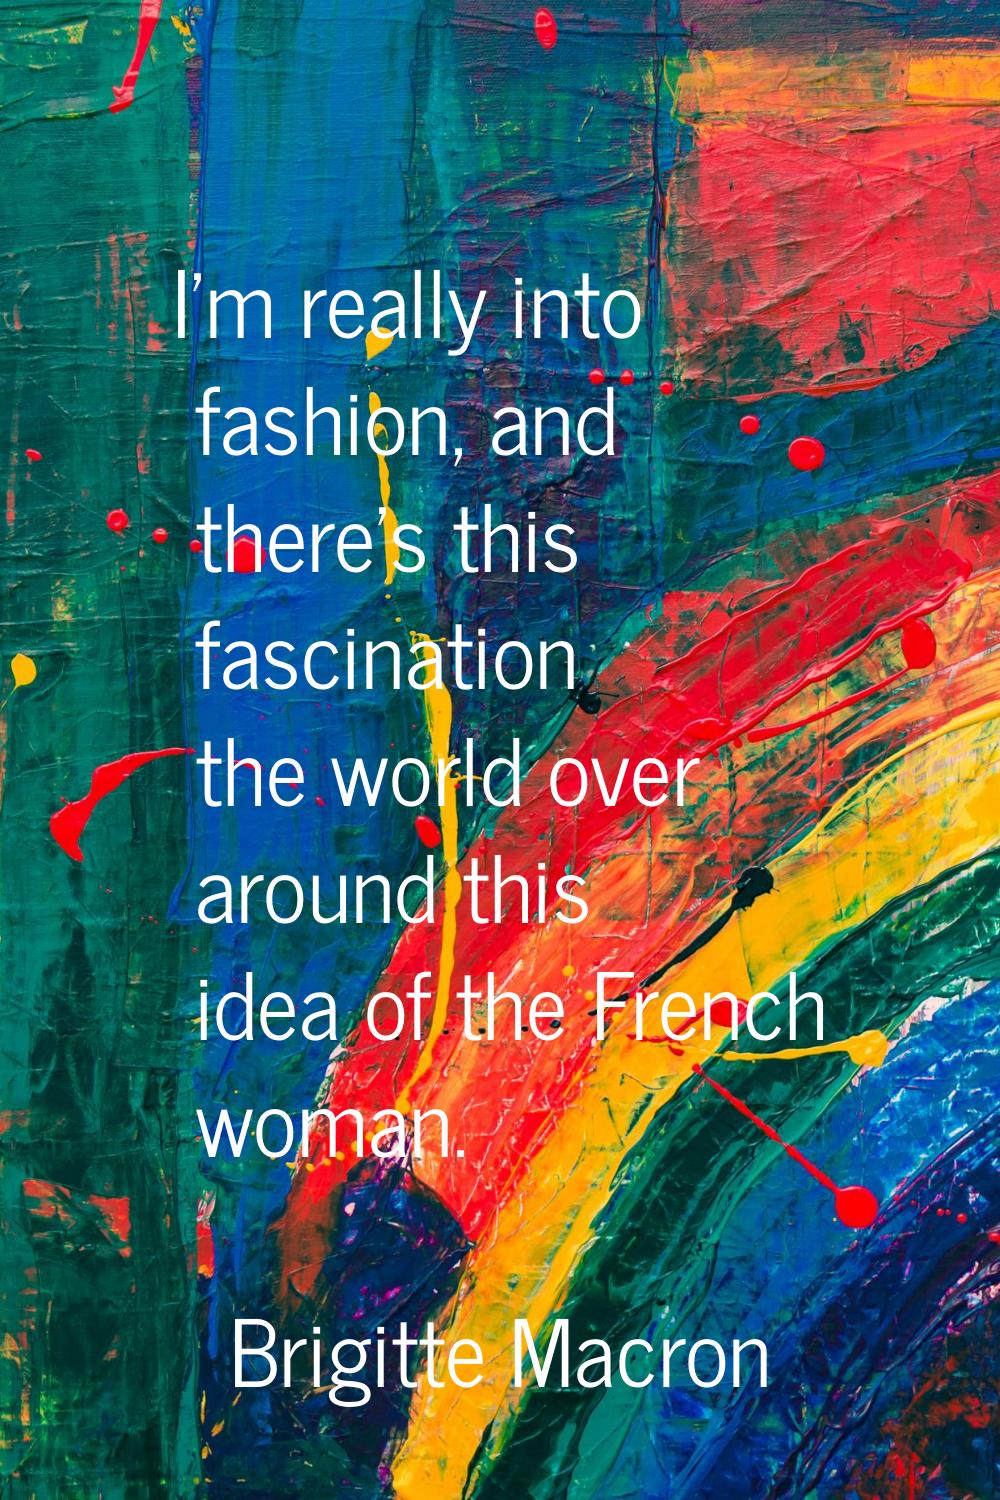 I'm really into fashion, and there's this fascination the world over around this idea of the French